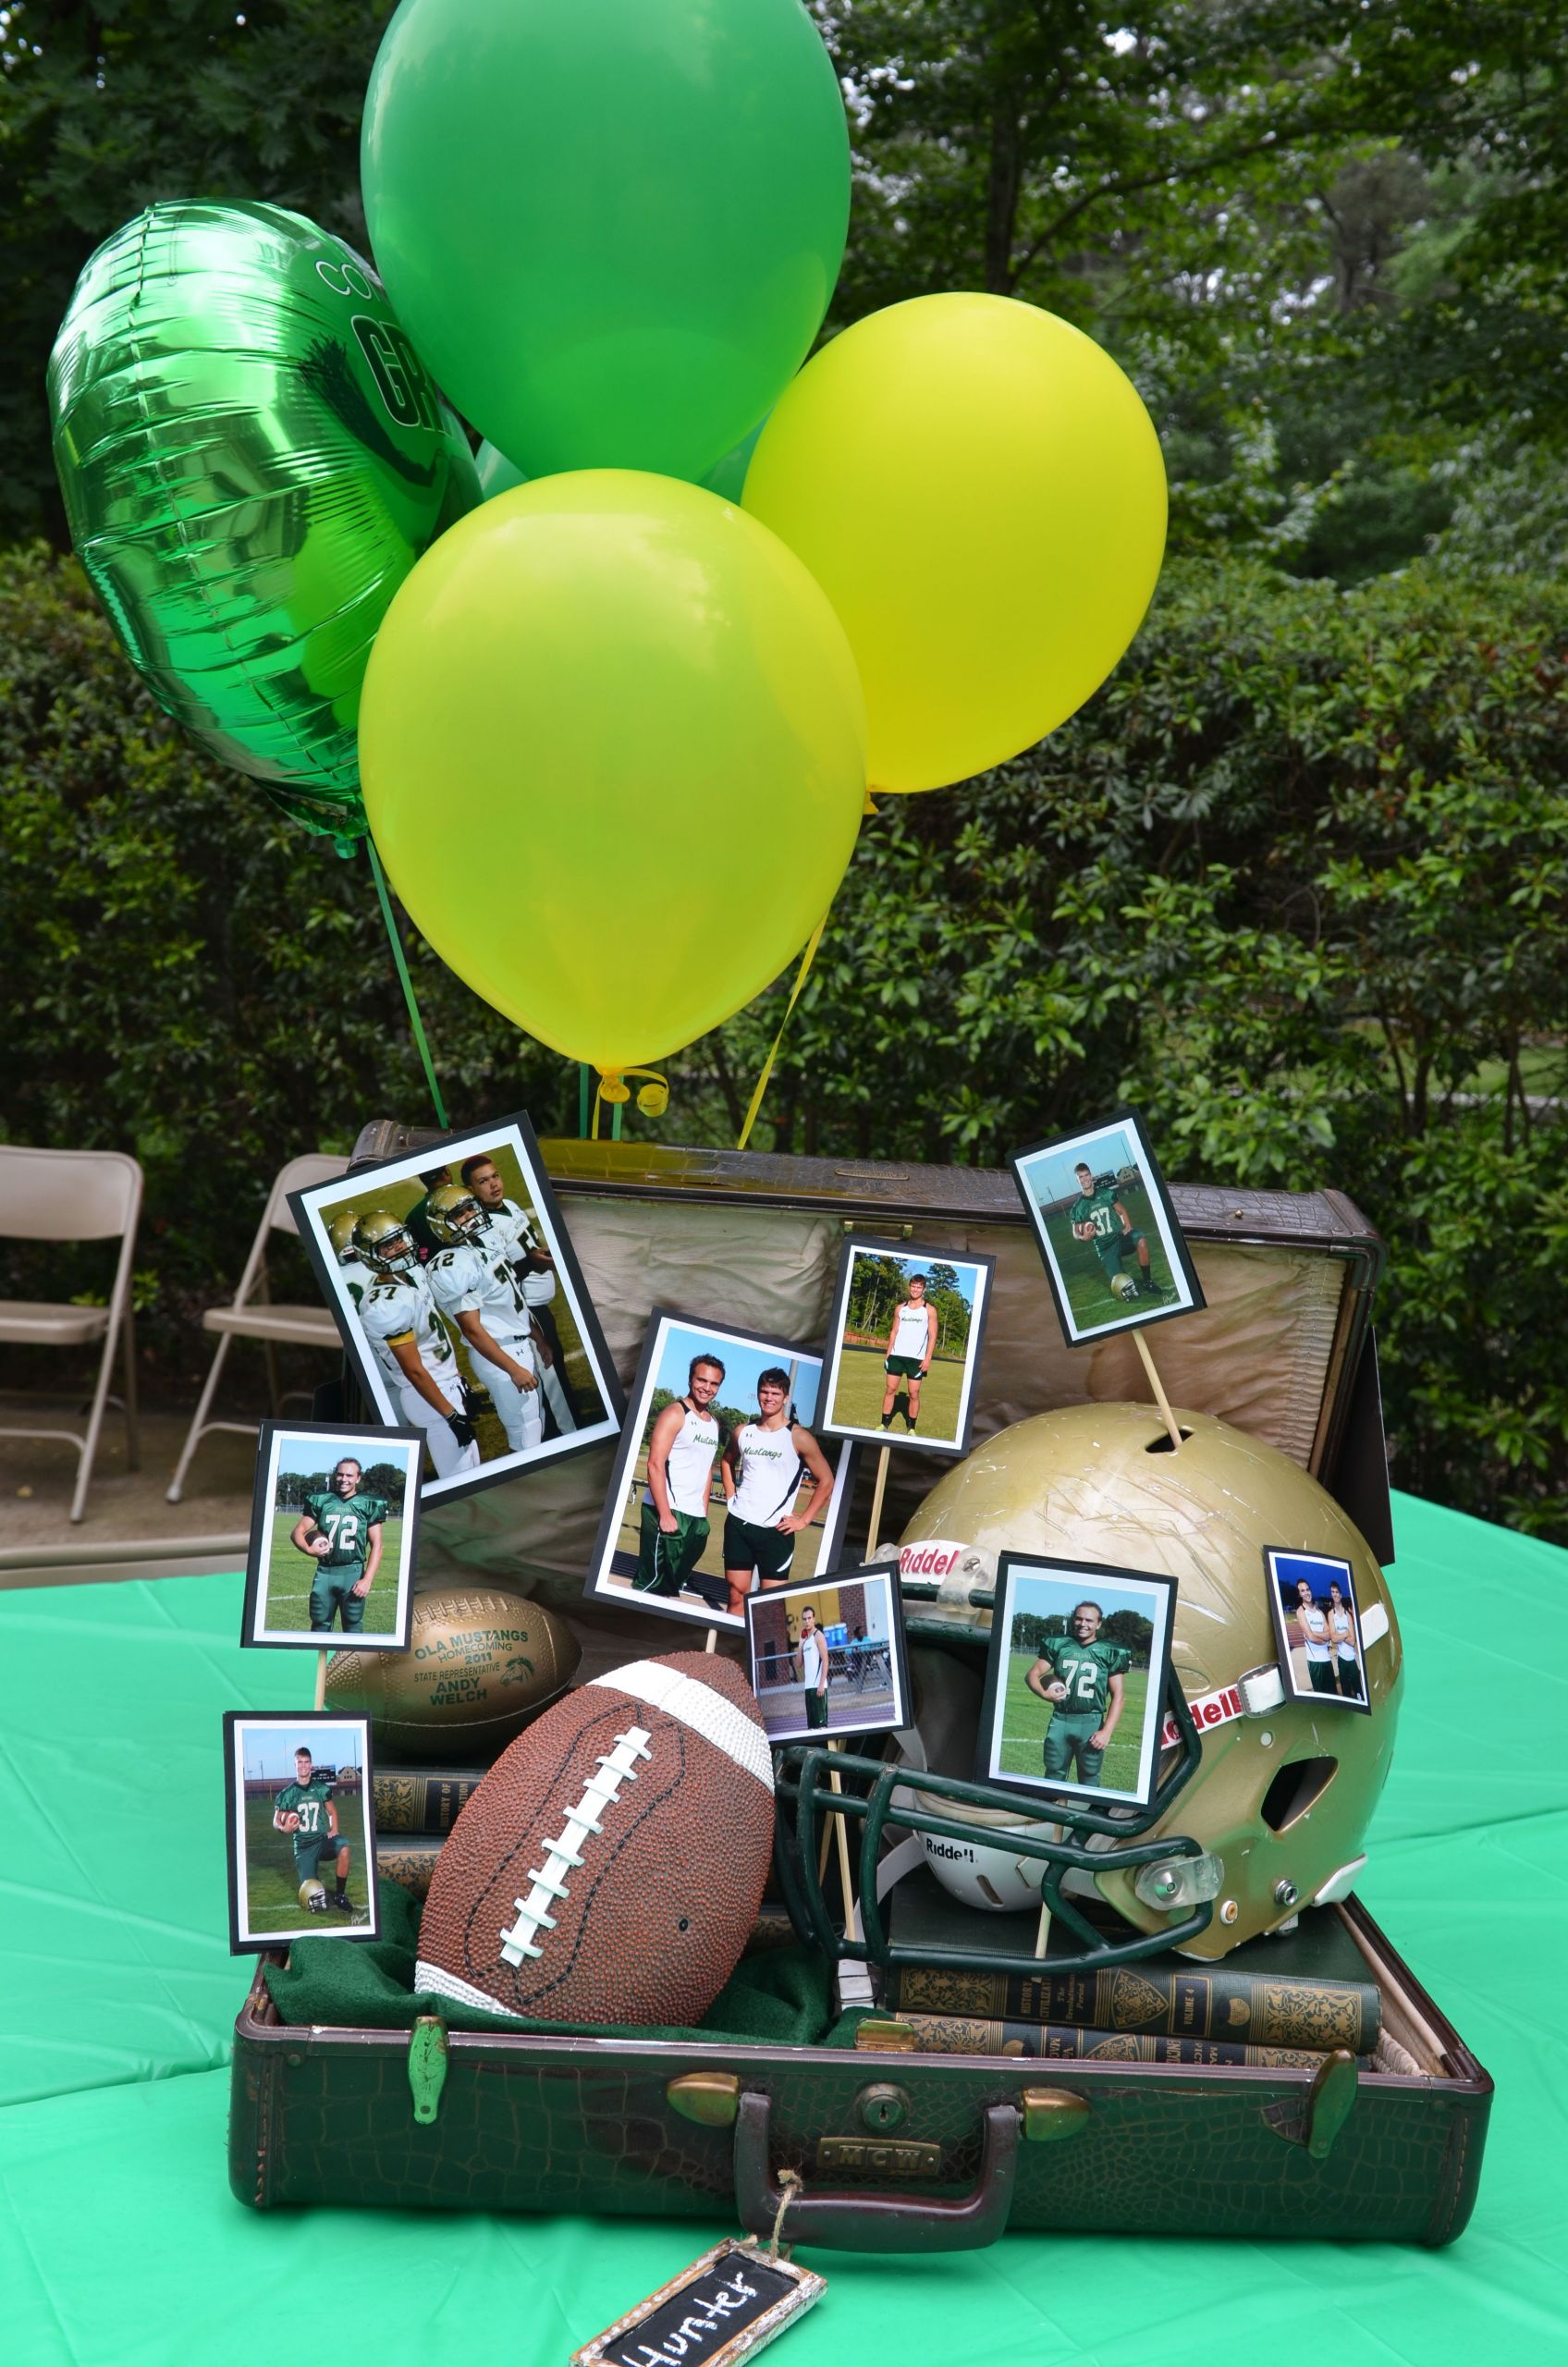 Graduation Party Decoration Ideas For Guys
 Centerpiece for Boys could easily change this up for